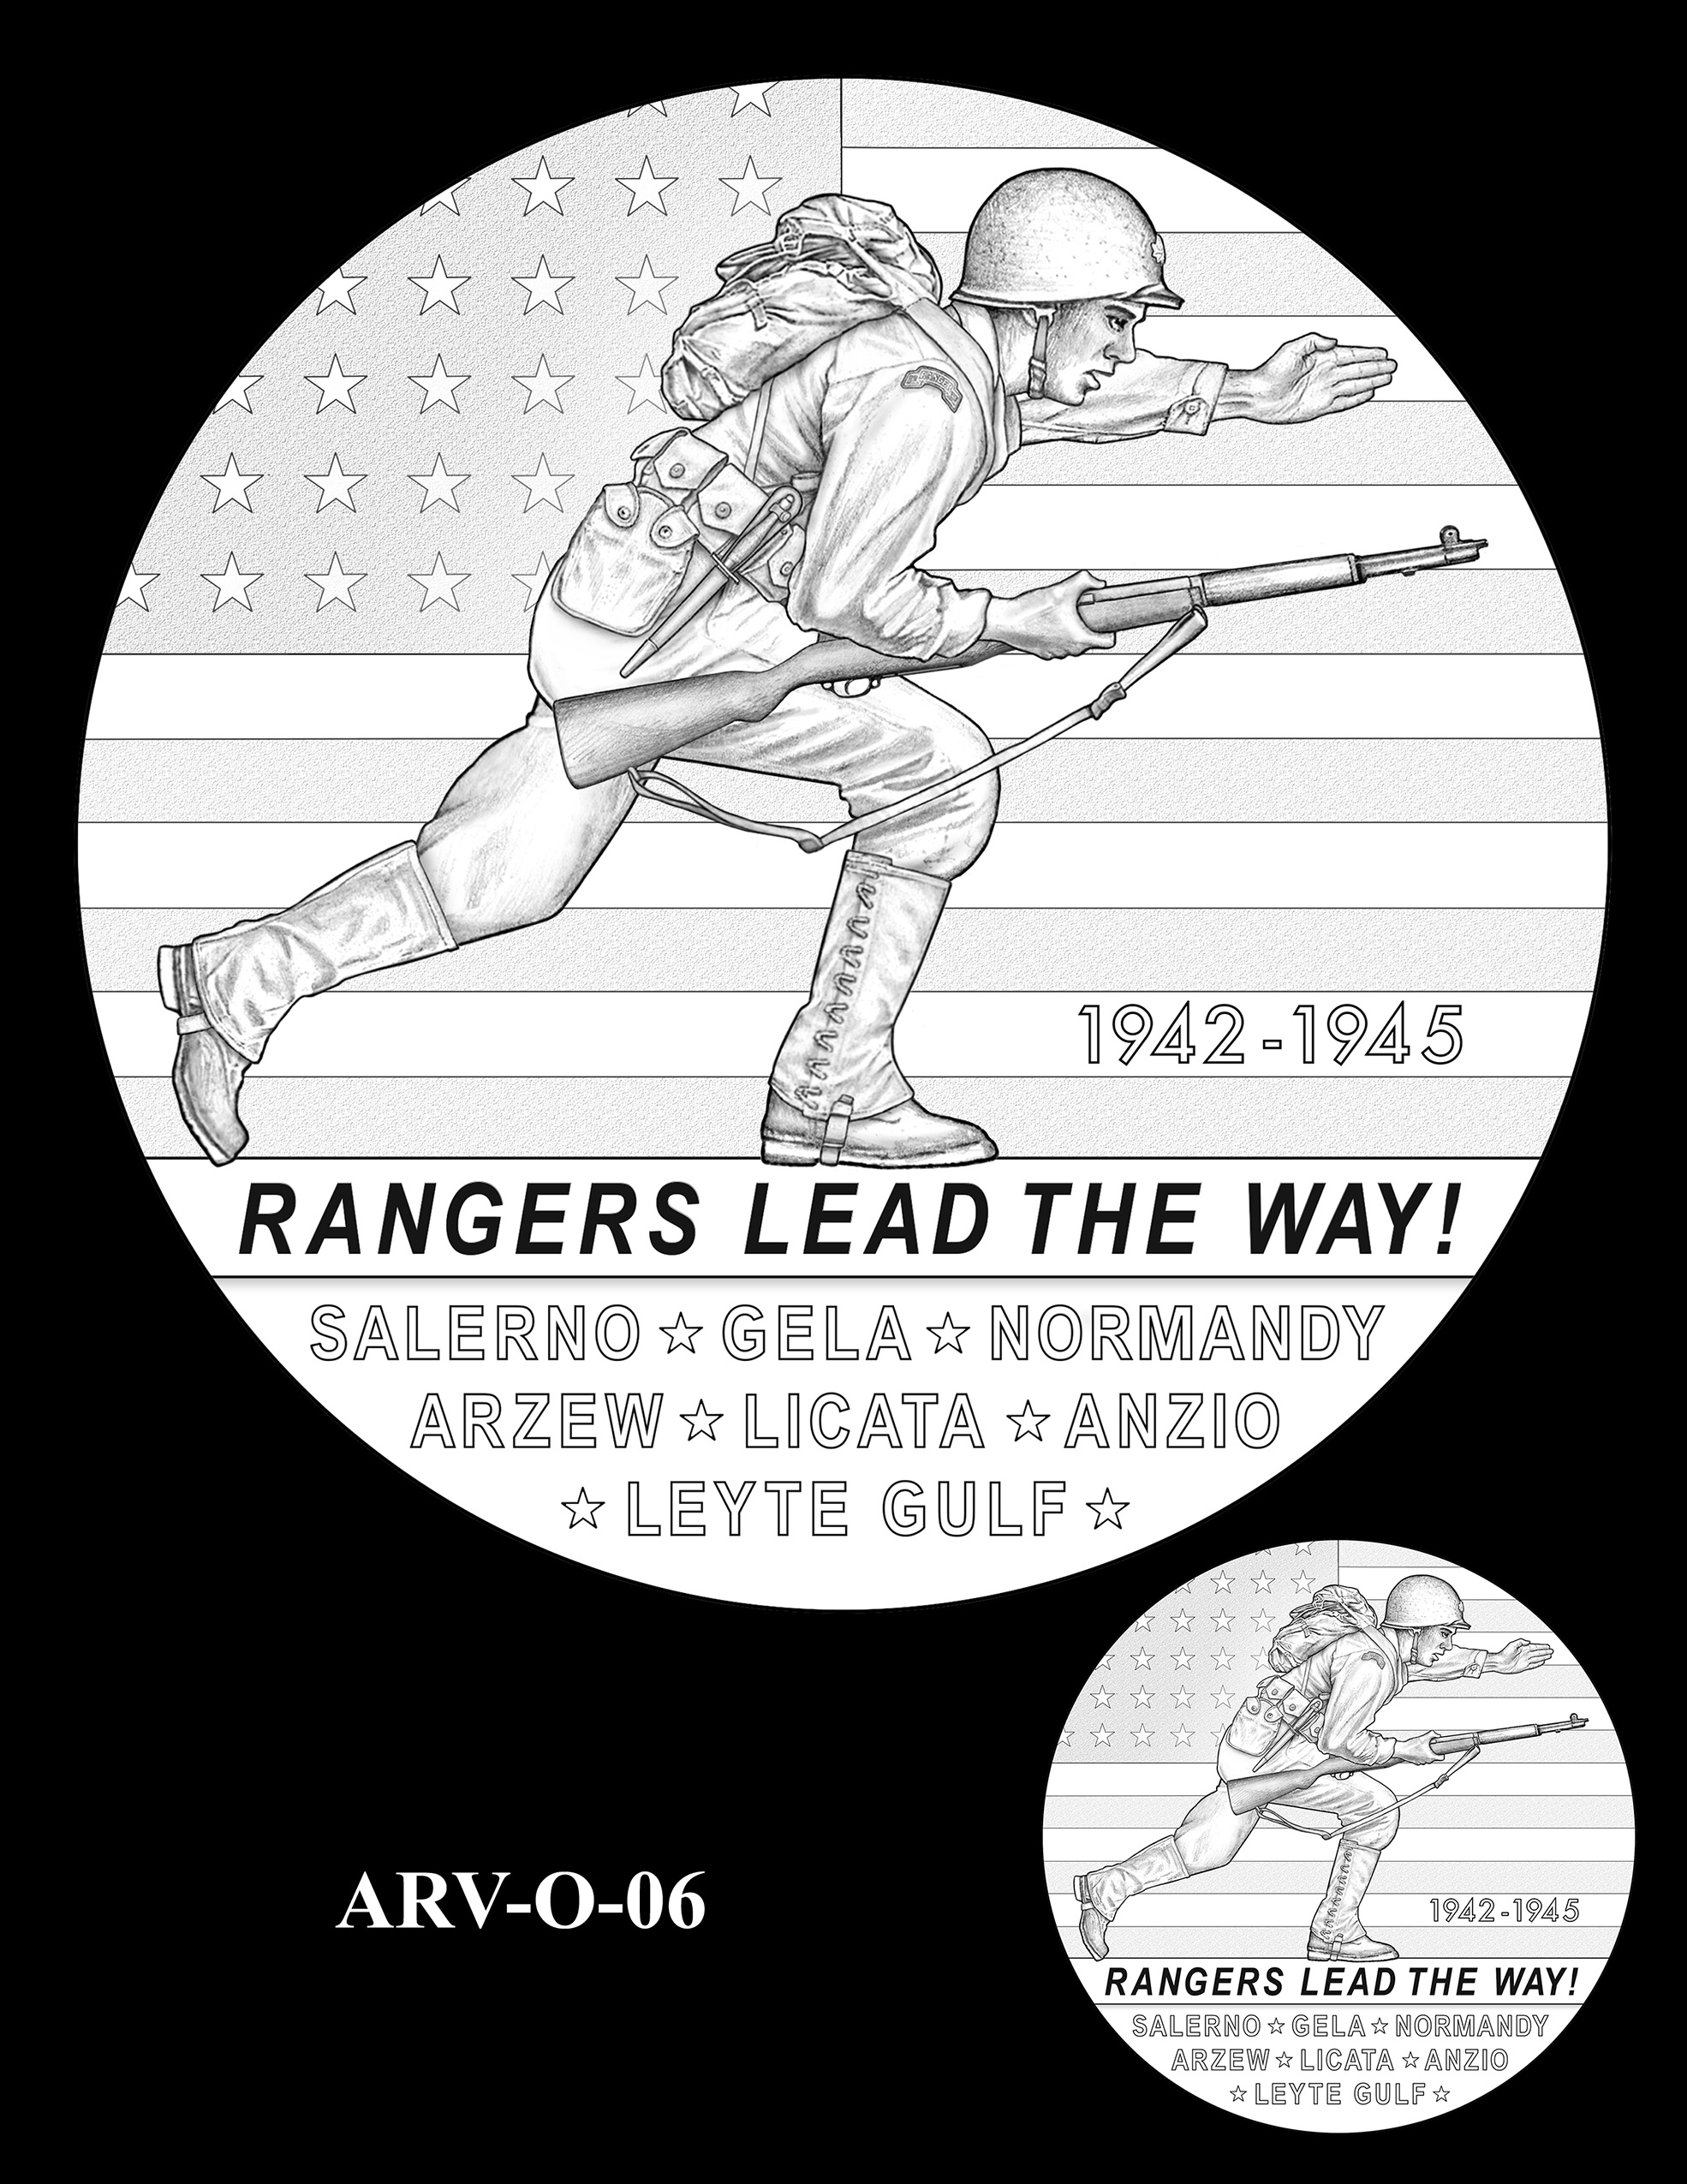 ARV-O-06 -- Army Ranger Veterans of WWII Congressional Gold Medal